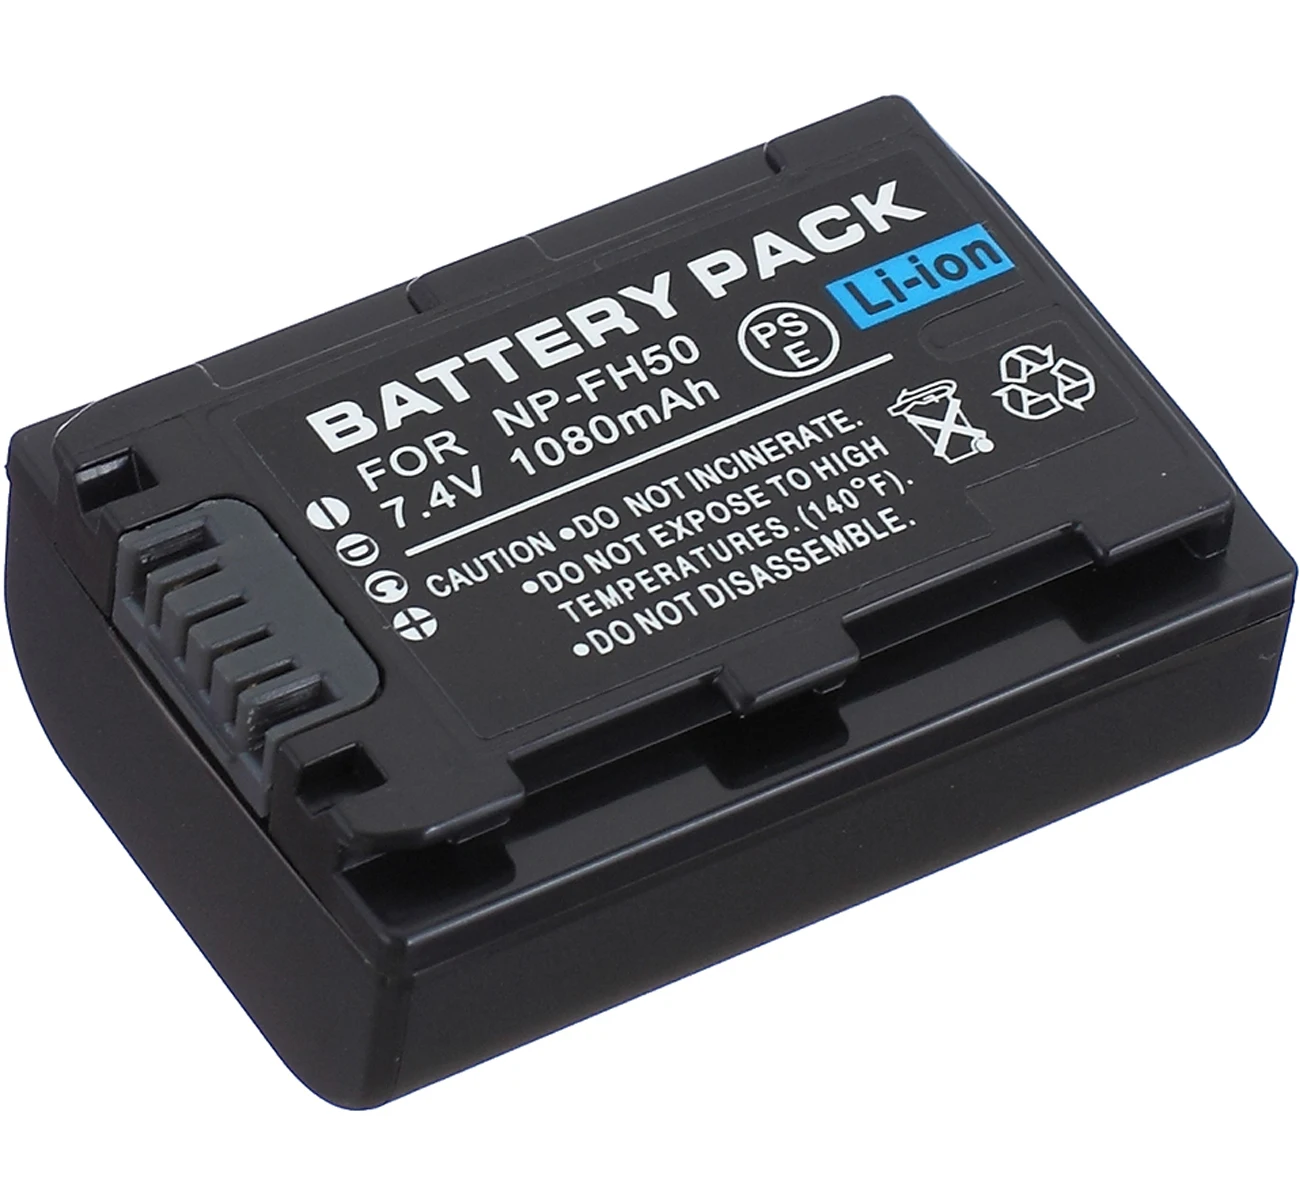 

Battery Pack for Sony HDR-CX6E, HDR-CX6EK, HDR-CX7E, HDR-CX7EK, HDR-CX11E, HDR-CX12E, HDR-CX100E, HDR-CX500E Handycam Camcorder